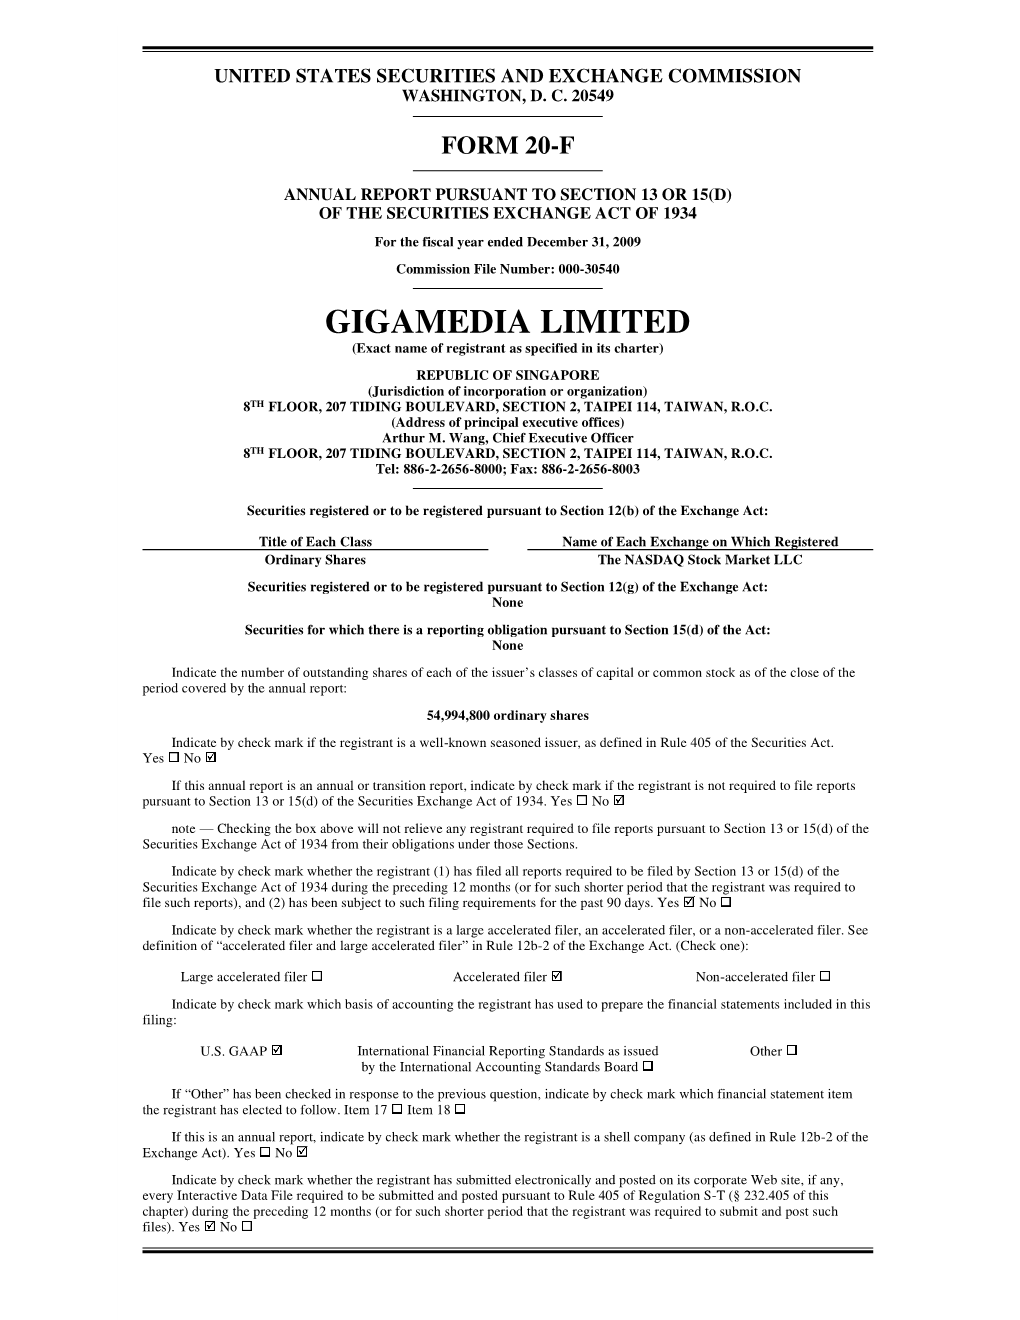 Gigamedia Limited